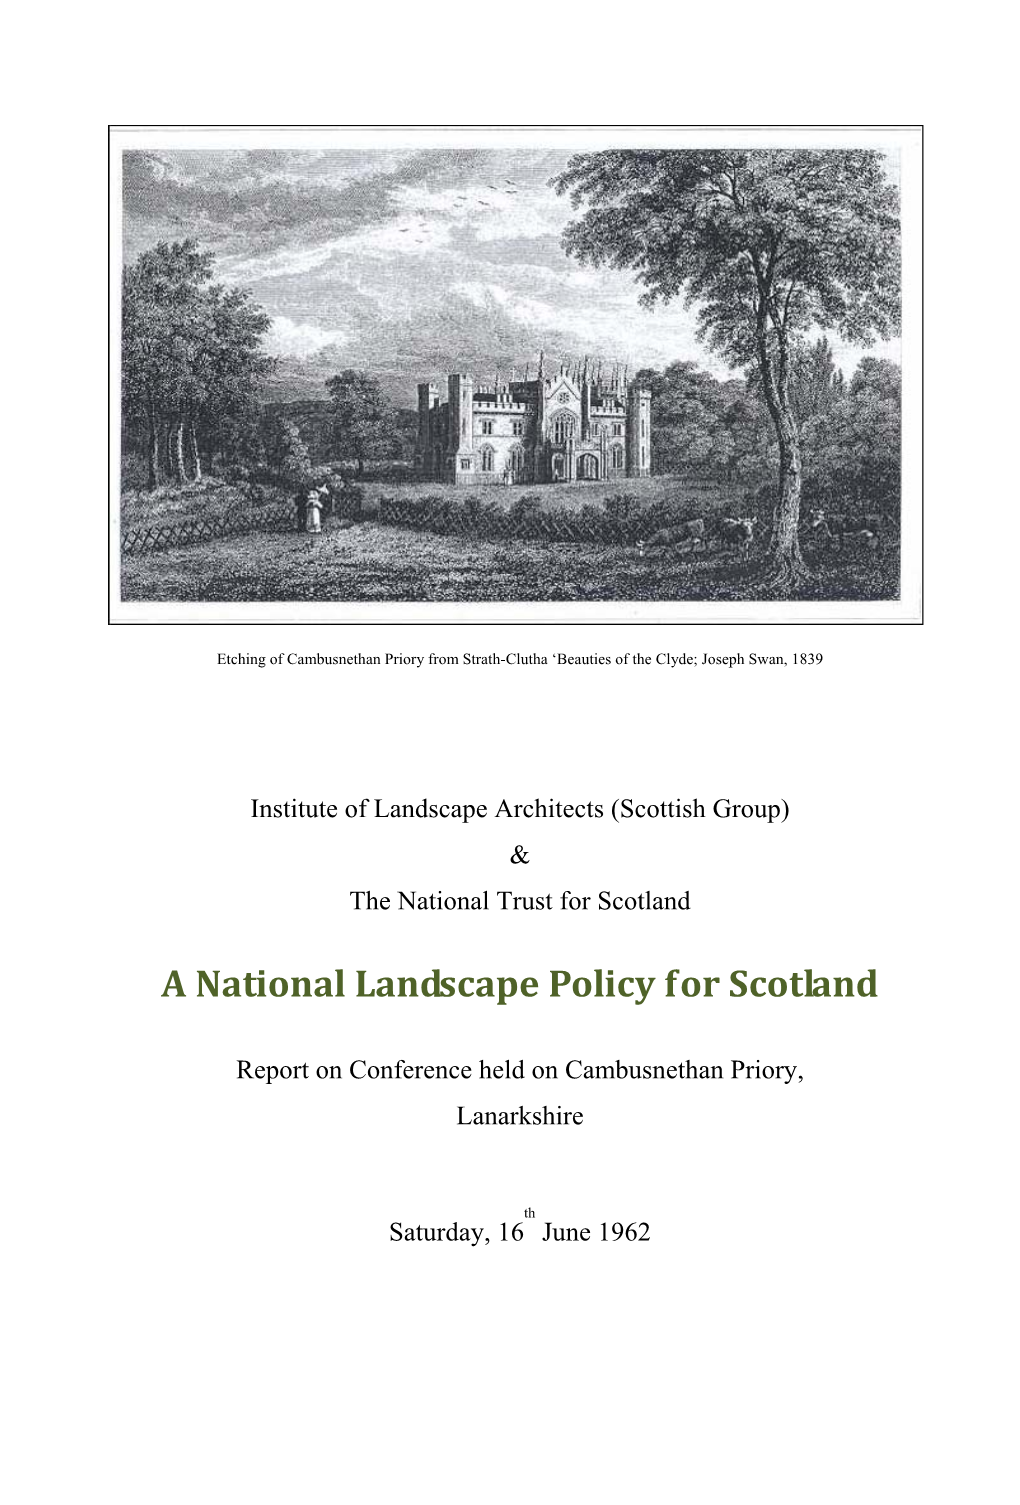 A National Landscape Policy for Scotland